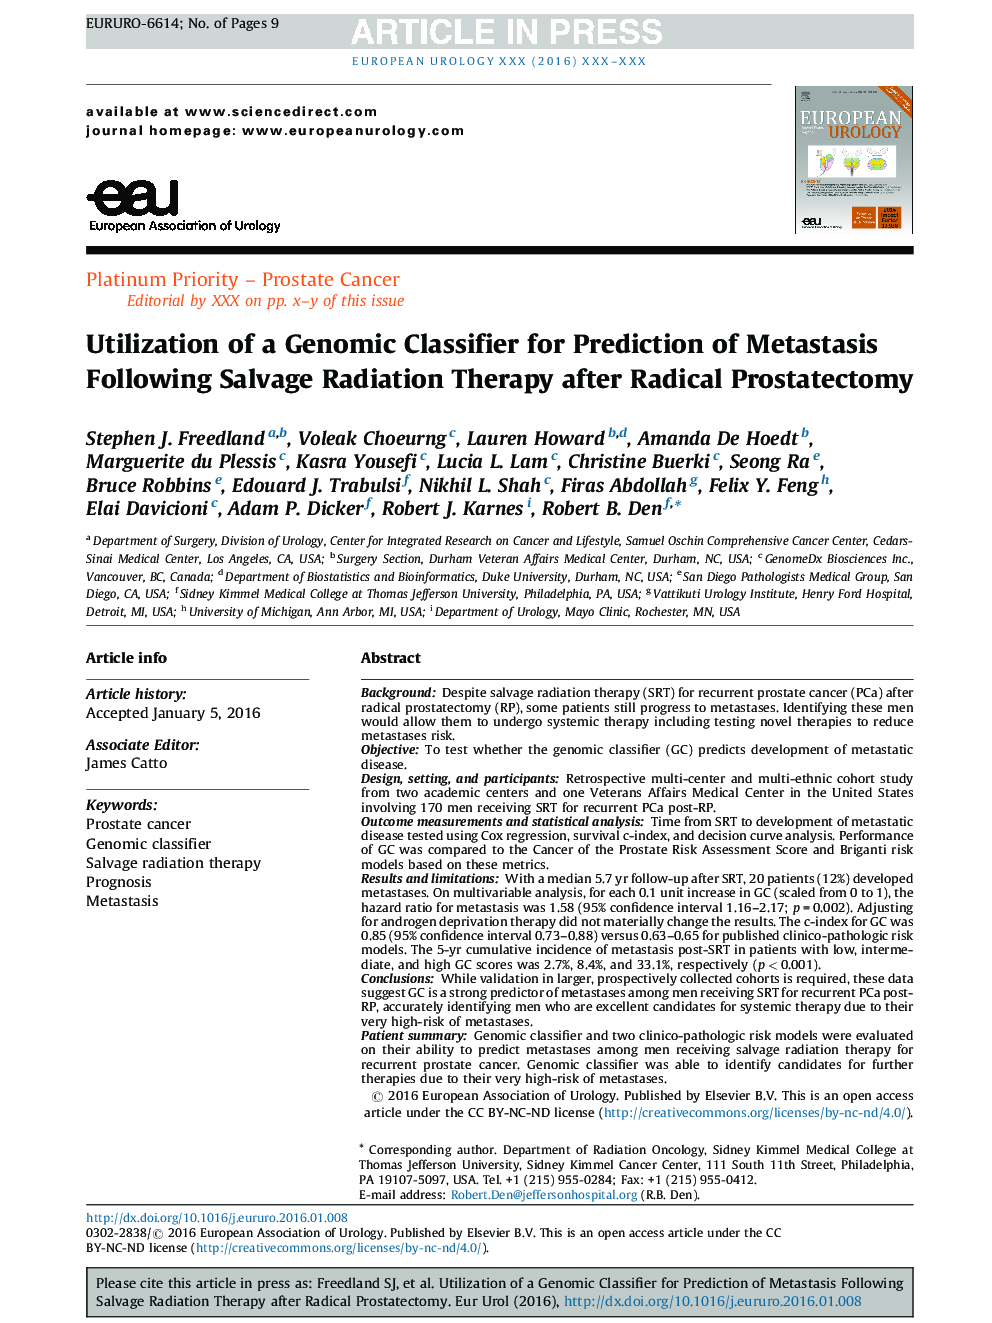 Utilization of a Genomic Classifier for Prediction of Metastasis Following Salvage Radiation Therapy after Radical Prostatectomy